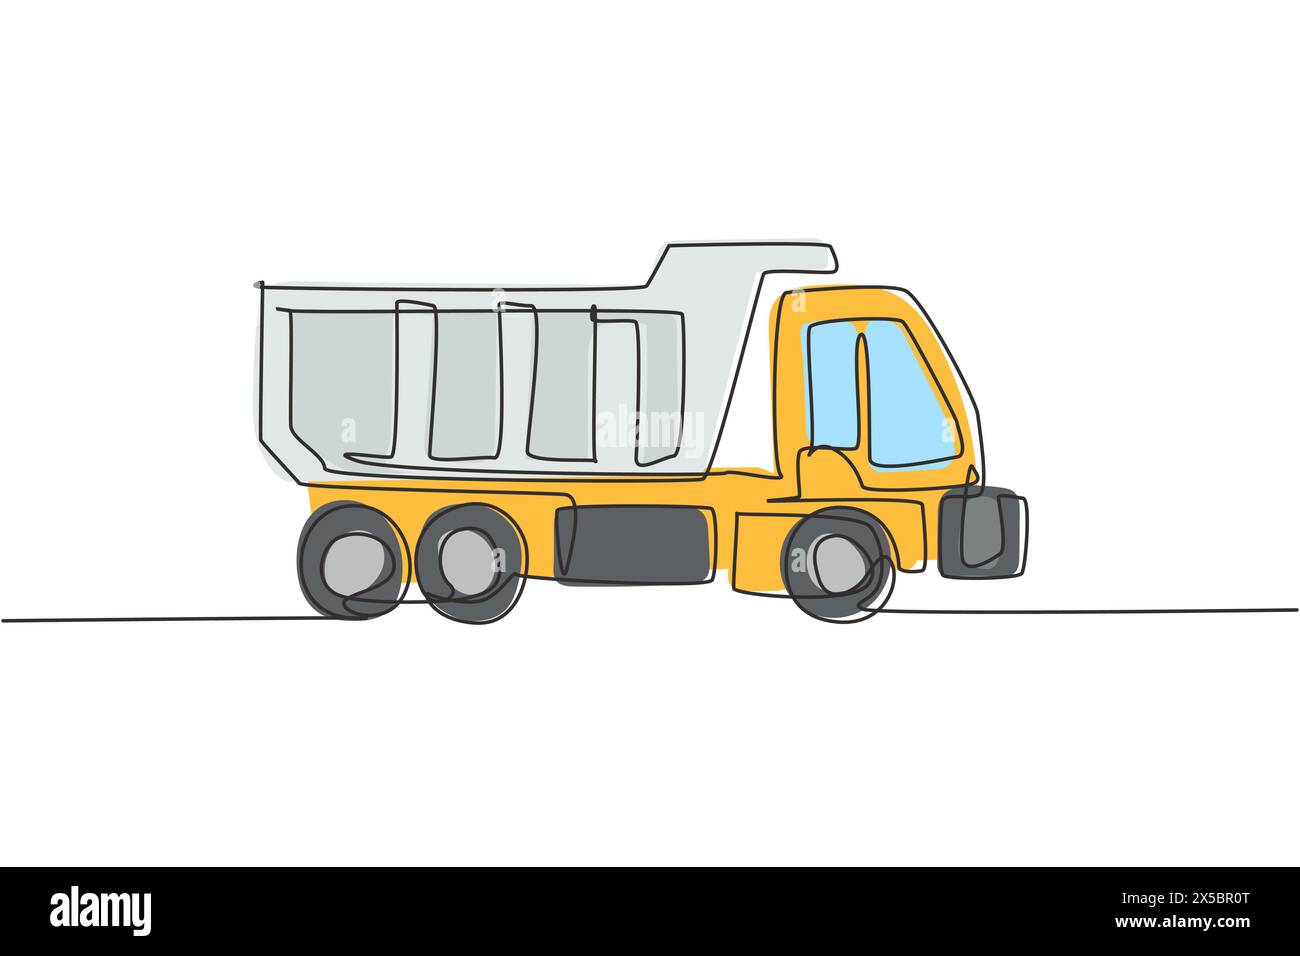 One continuous line drawing of long truck for cargo logistic delivery, business vehicle. Heavy transport trucks equipment concept. Dynamic single line Stock Vector